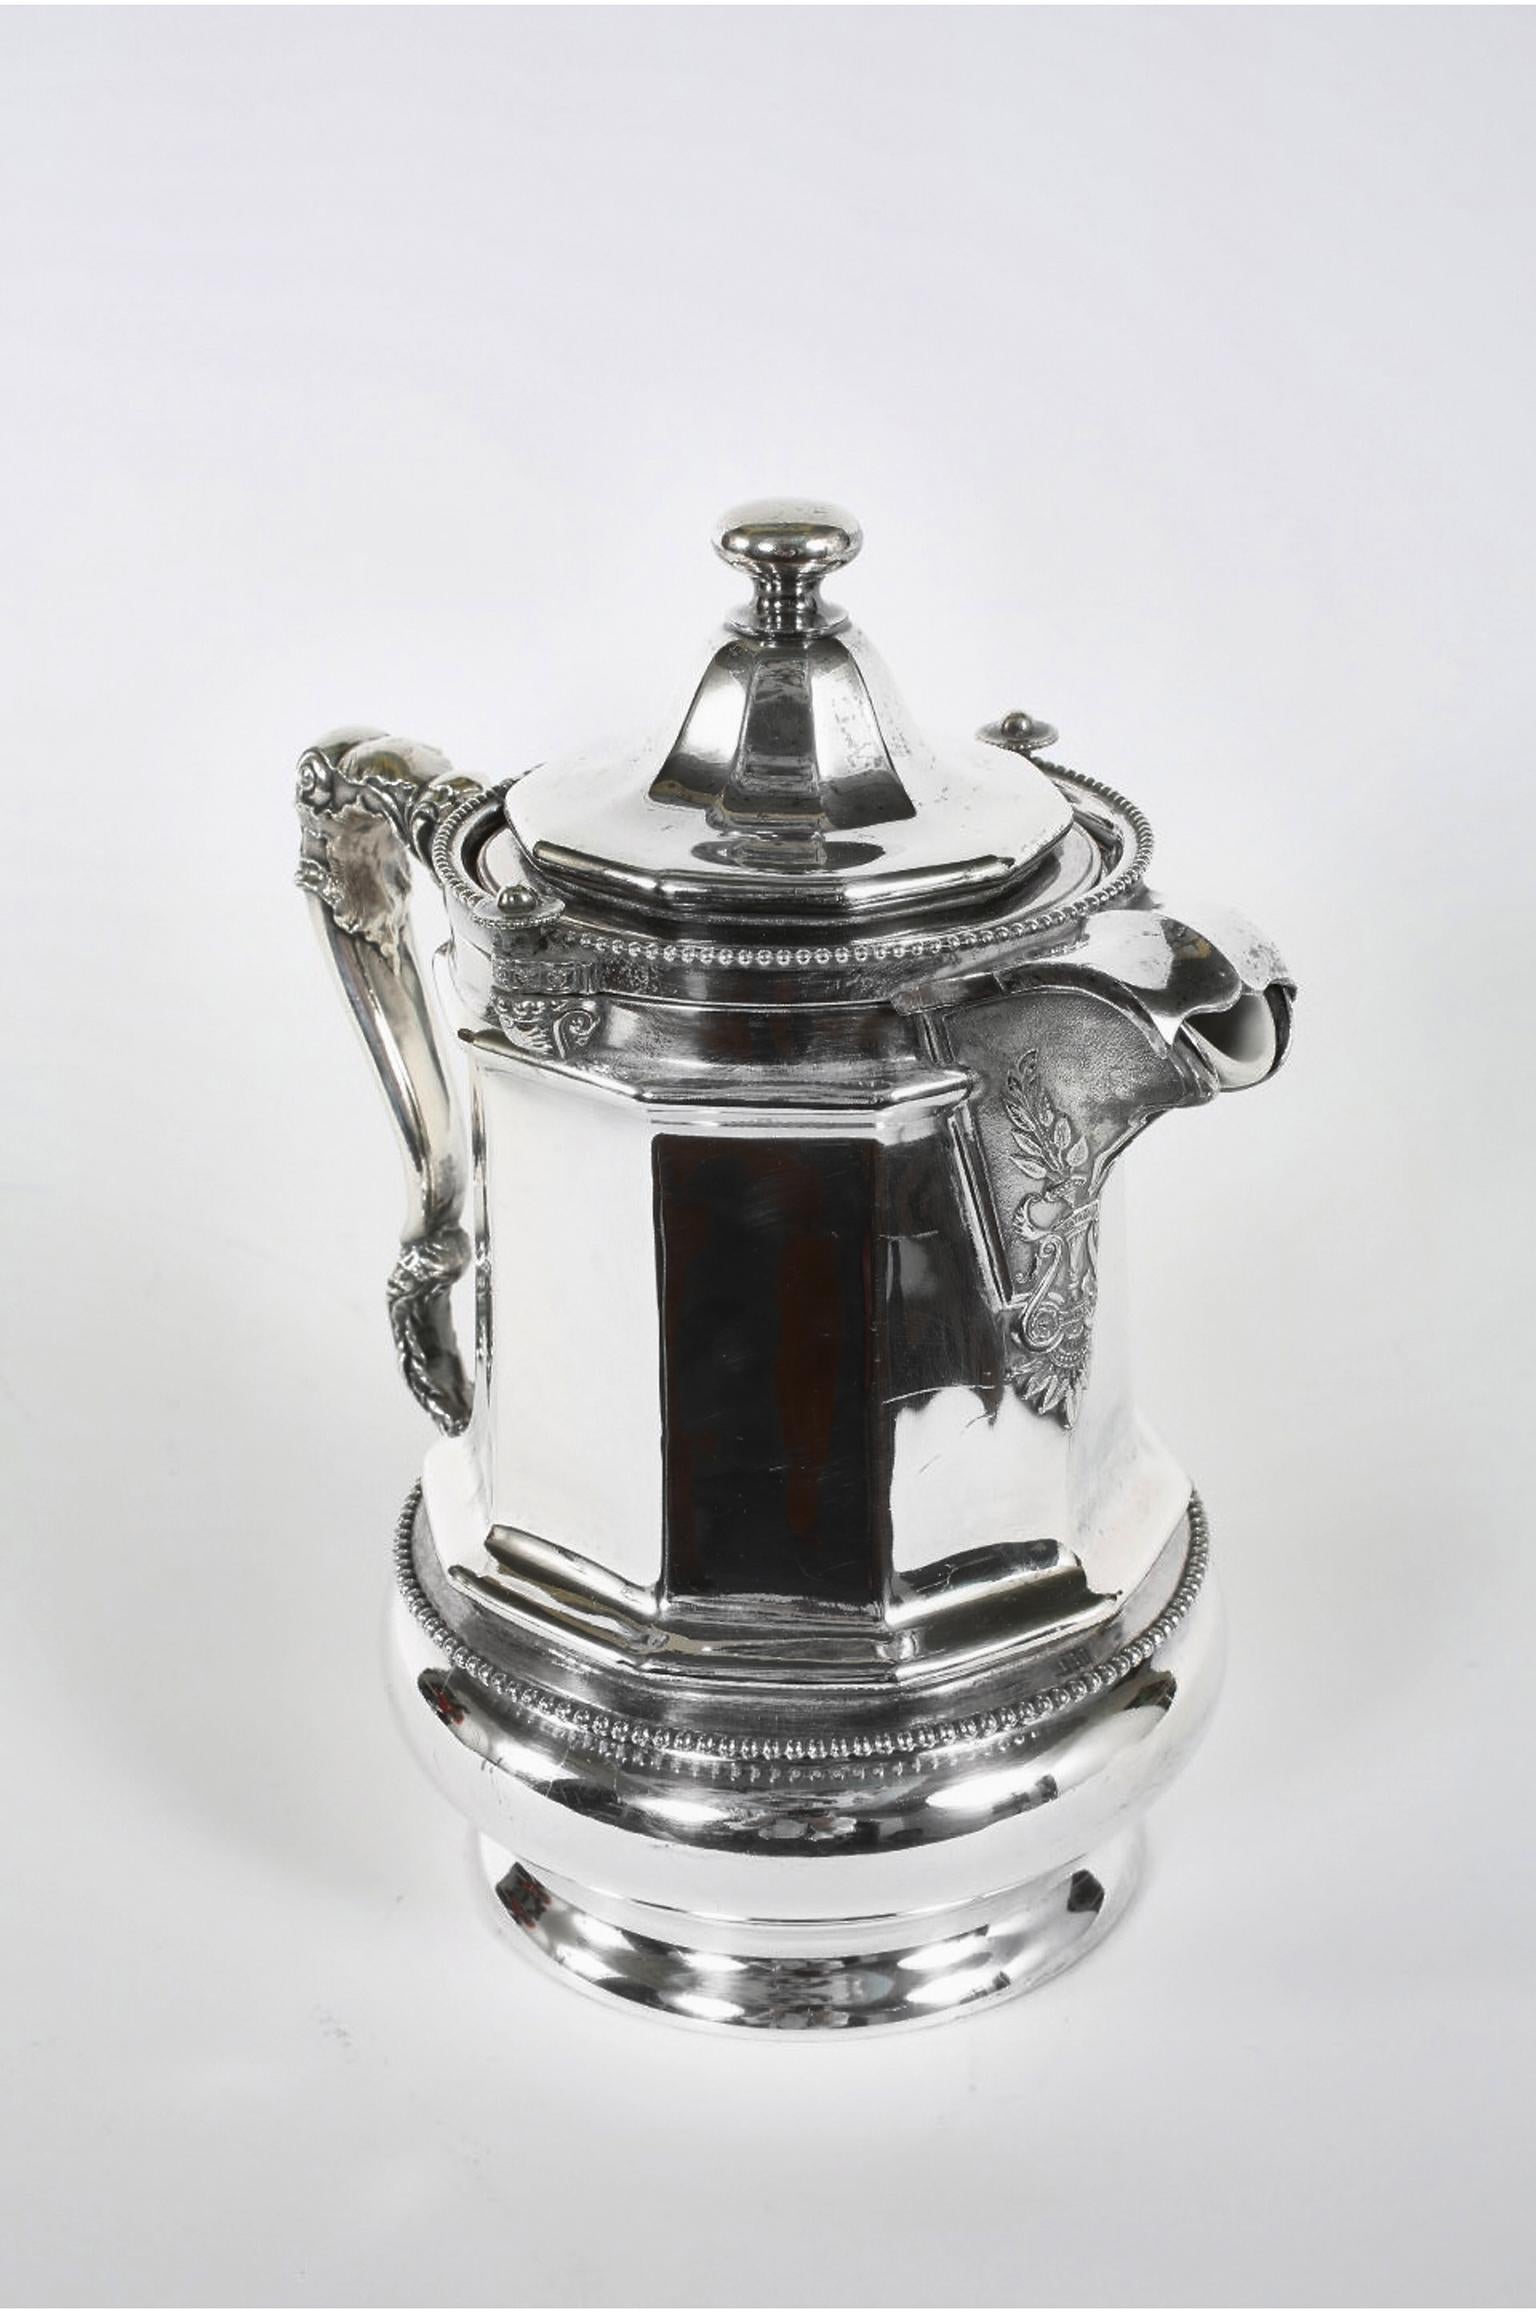 Early 20th century North American silver plated with porcelain insert interior tea / coffee pot. The tea / coffee are in great vintage condition with wear consistent with age / use. Maker's mark undersigned. The pot stand about 11.5